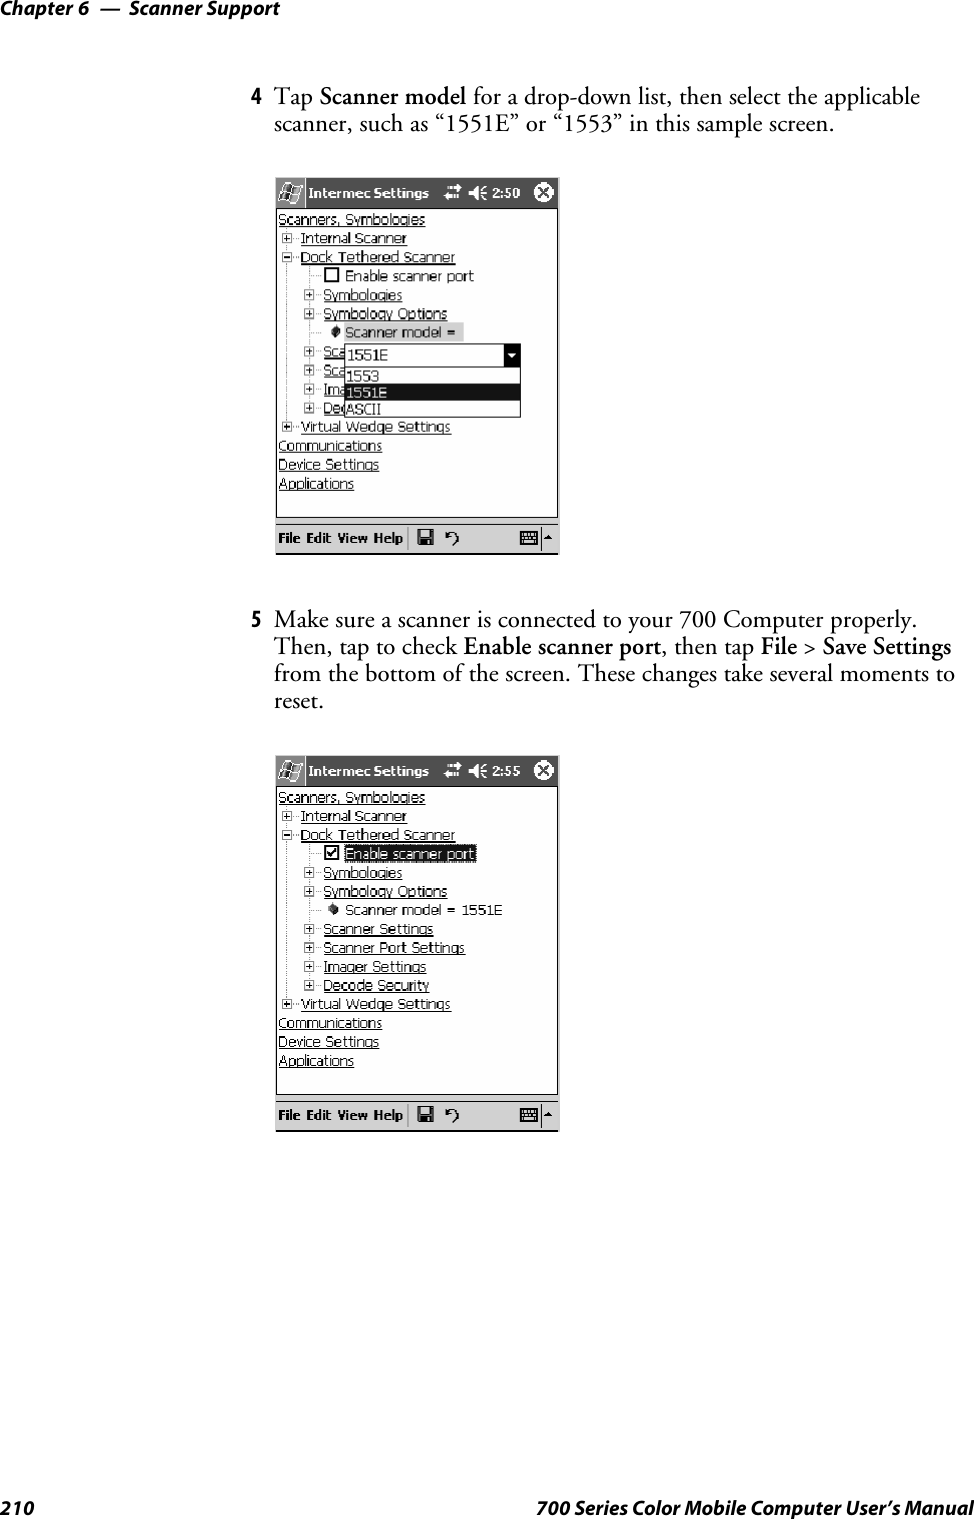 Scanner SupportChapter —6210 700 Series Color Mobile Computer User’s Manual4Tap Scanner model for a drop-down list, then select the applicablescanner, such as “1551E” or “1553” in this sample screen.5Make sure a scanner is connected to your 700 Computer properly.Then, tap to check Enable scanner port,thentapFile &gt;Save Settingsfrom the bottom of the screen. These changes take several moments toreset.